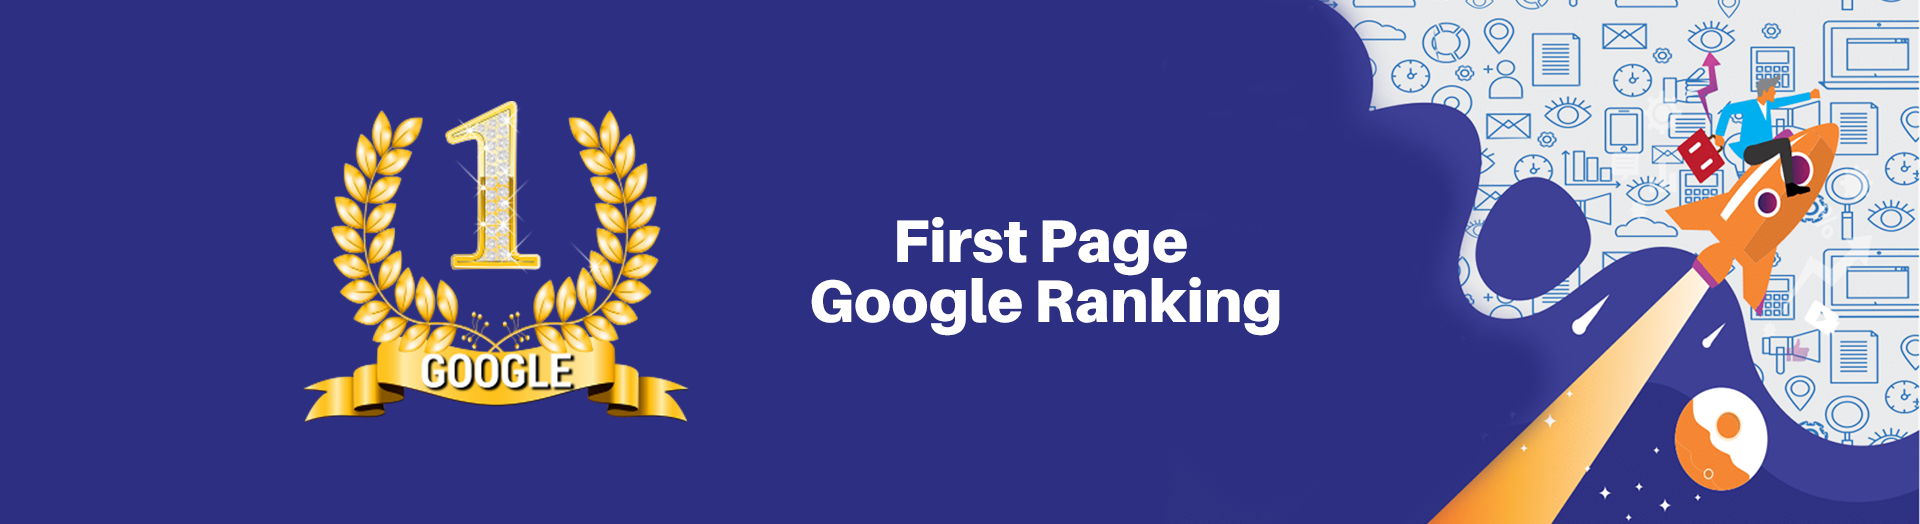 First Page Google Ranking